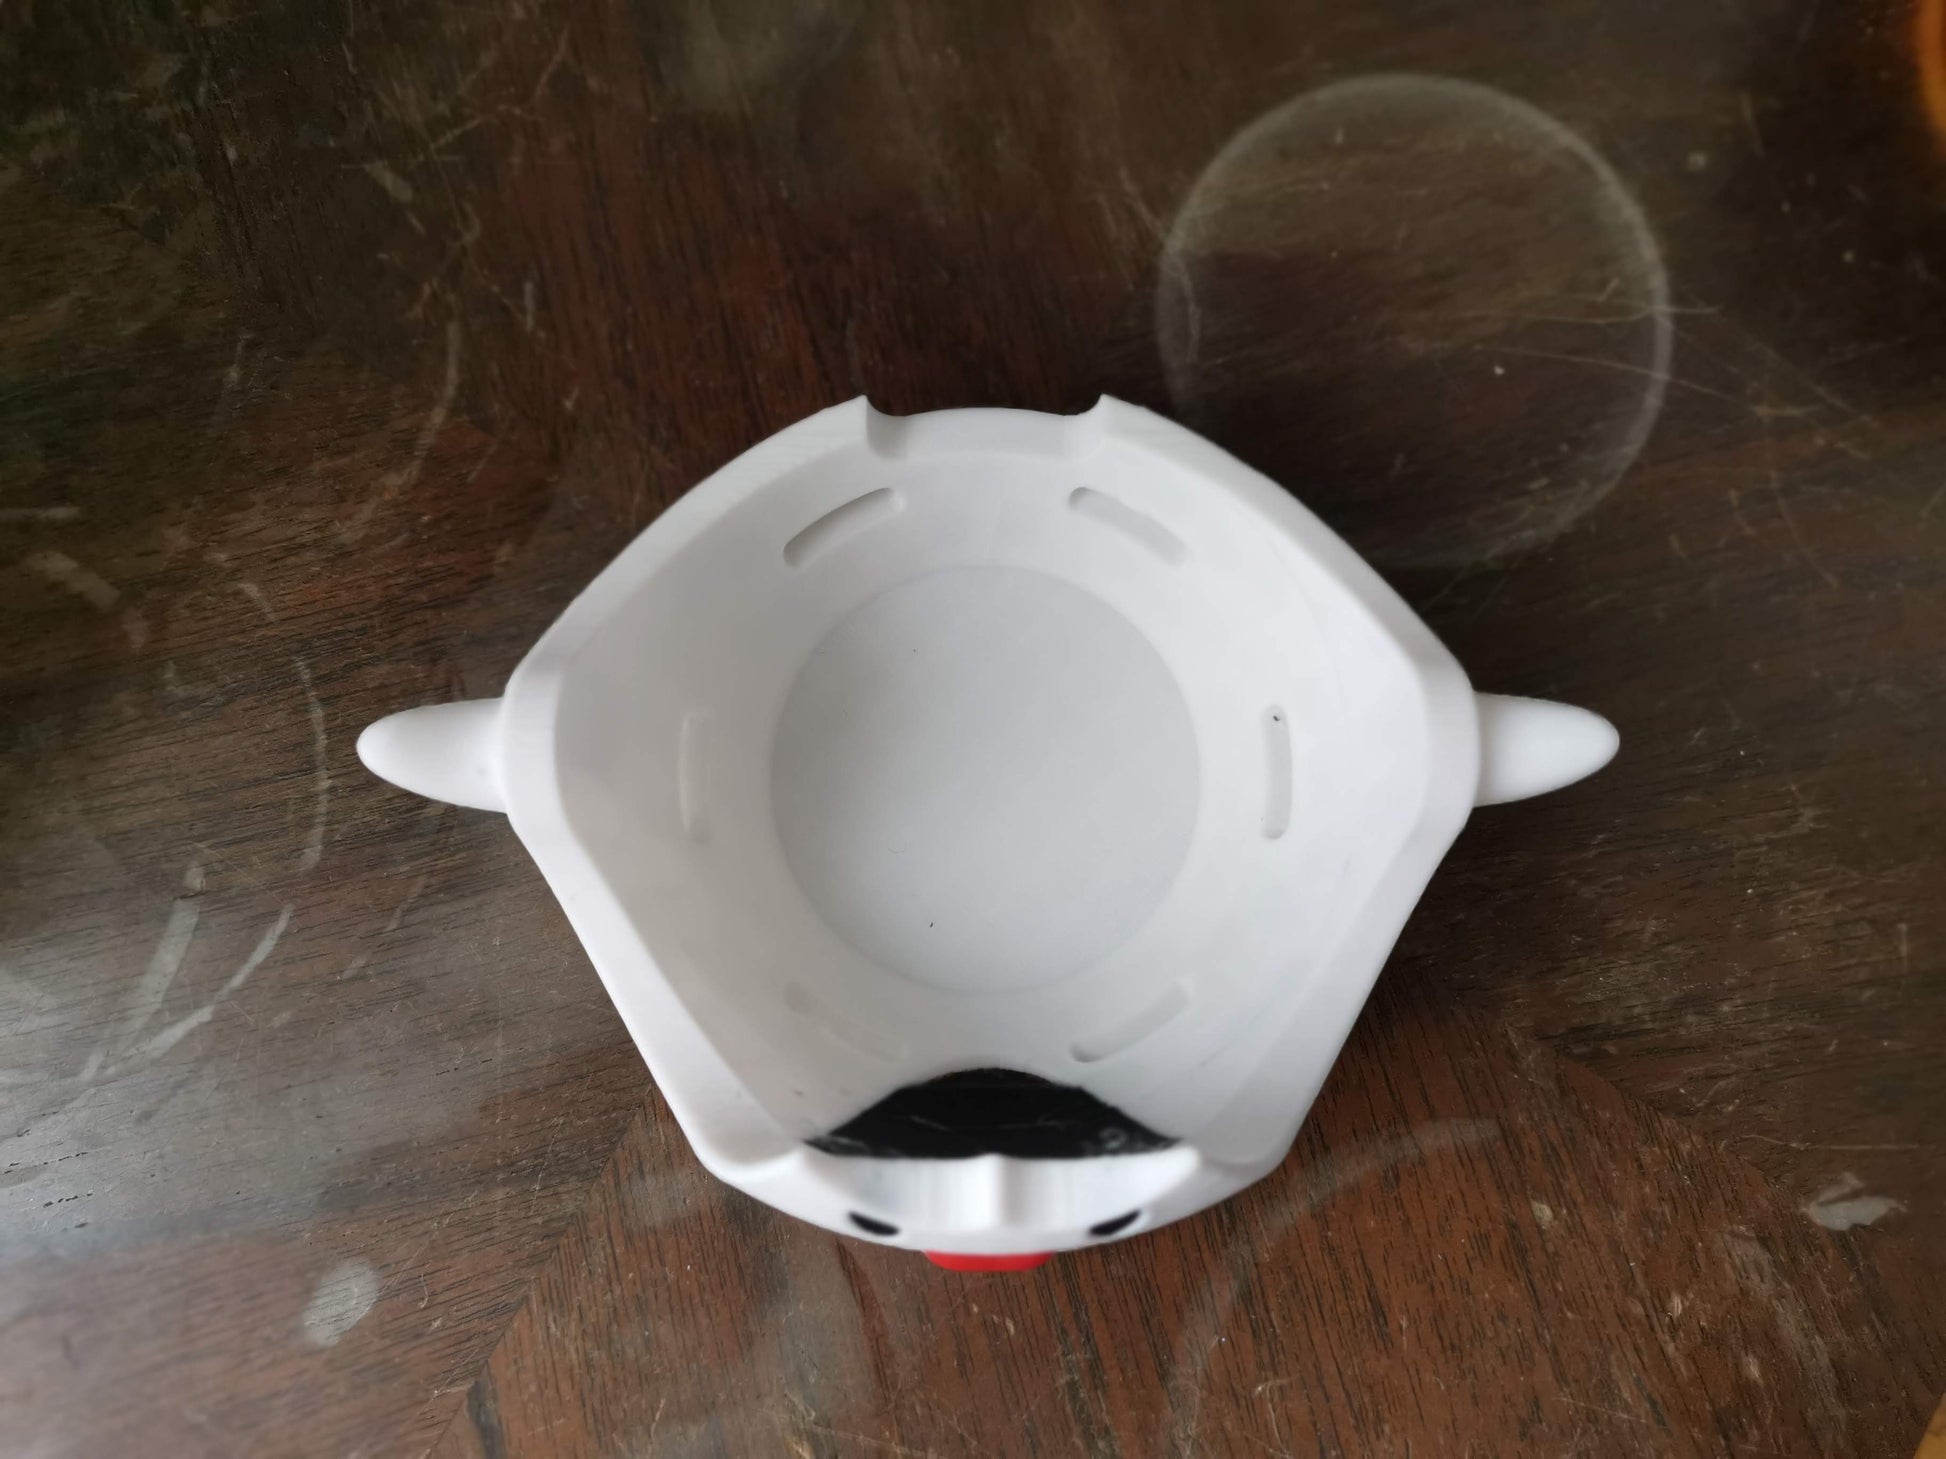 Alexa Echo Boo holder without echo inside from top down